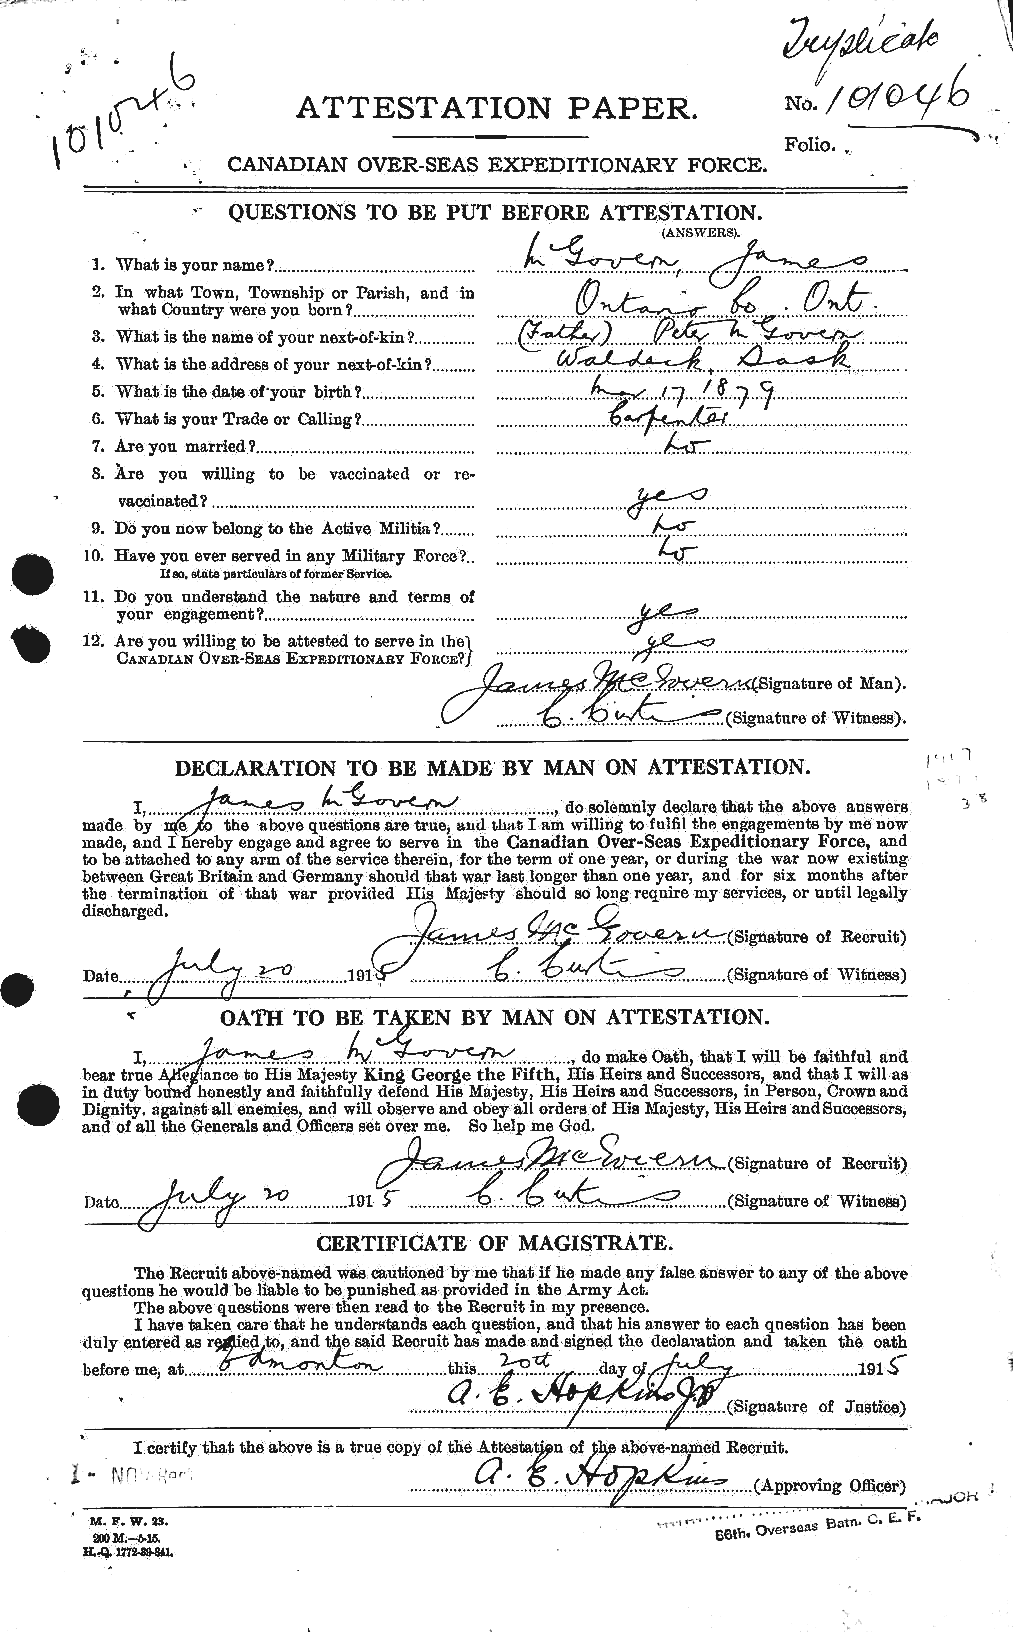 Personnel Records of the First World War - CEF 528566a